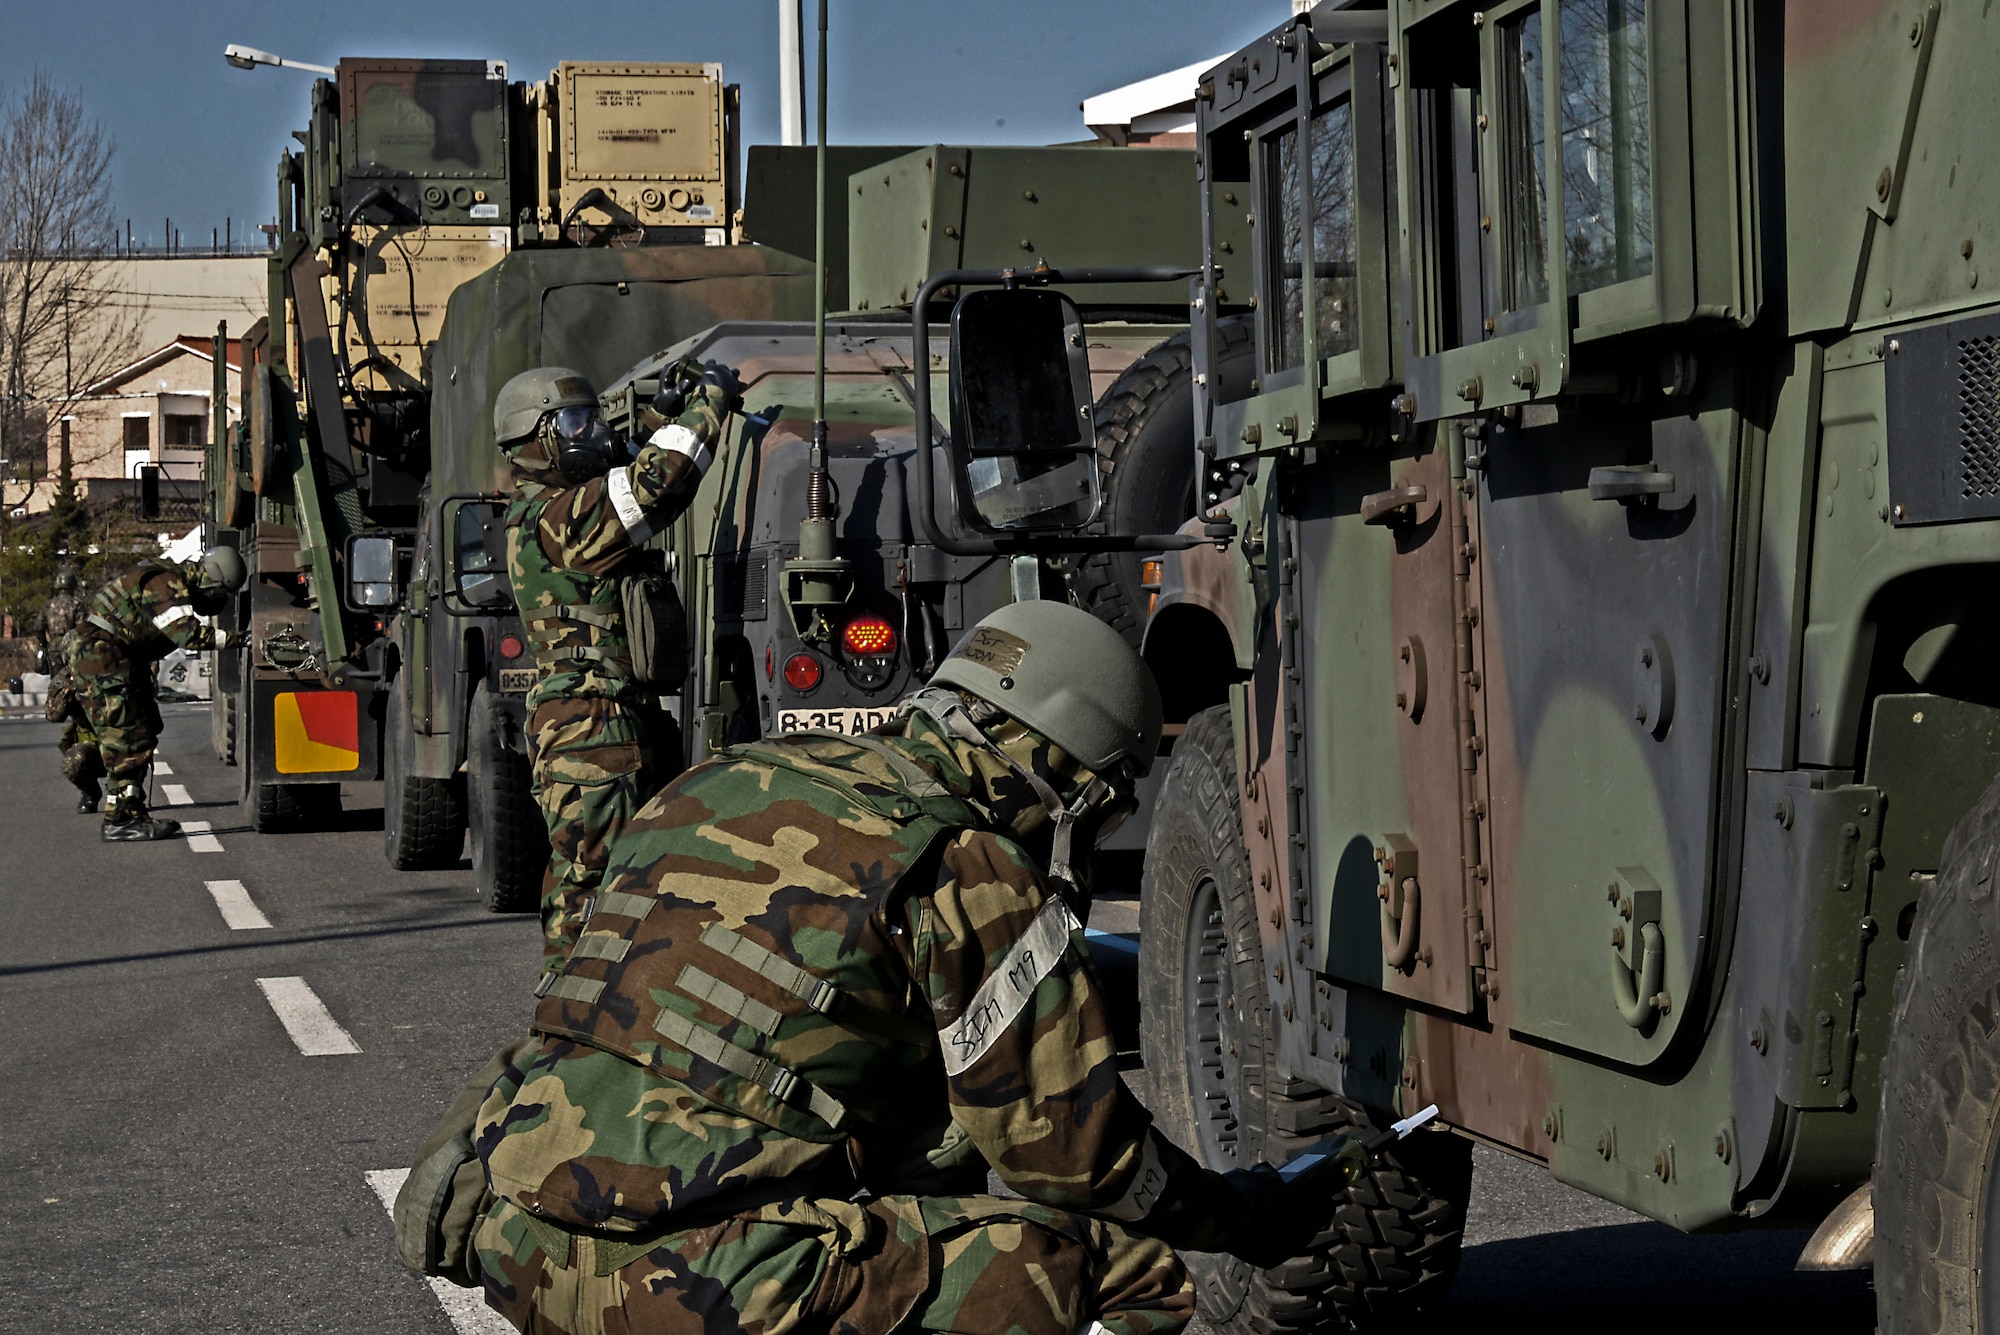 Airmen from the 51st Civil Engineer Squadron chemical, biological, radiological and nuclear reconnaissance team inspect U.S. Army vehicles for possible contamination during Exercise Beverly Midnight 16-01 March 10, 2016, on Osan Air Base, Republic of Korea. Two months of coordination went into making the scenario possible -- a scenario which brought ROK and U.S. soldiers and airmen together. (U.S. Air Force photo by Tech. Sgt. Travis Edwards/Released)